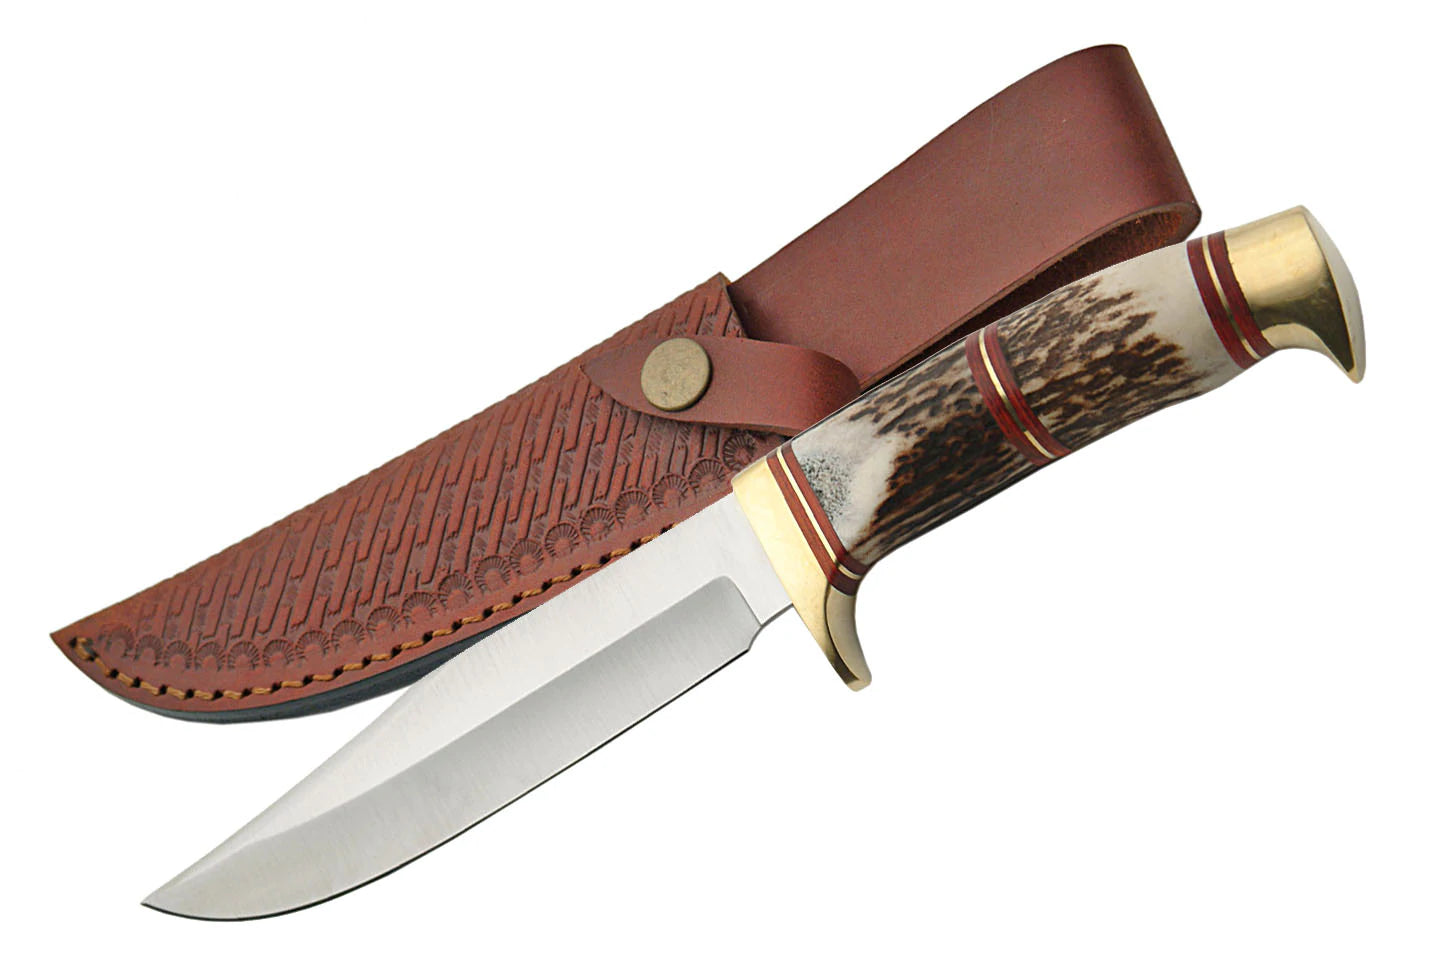 Knife (SS-3318) - 9.75" Steel Wolf Stag Hunting Knife